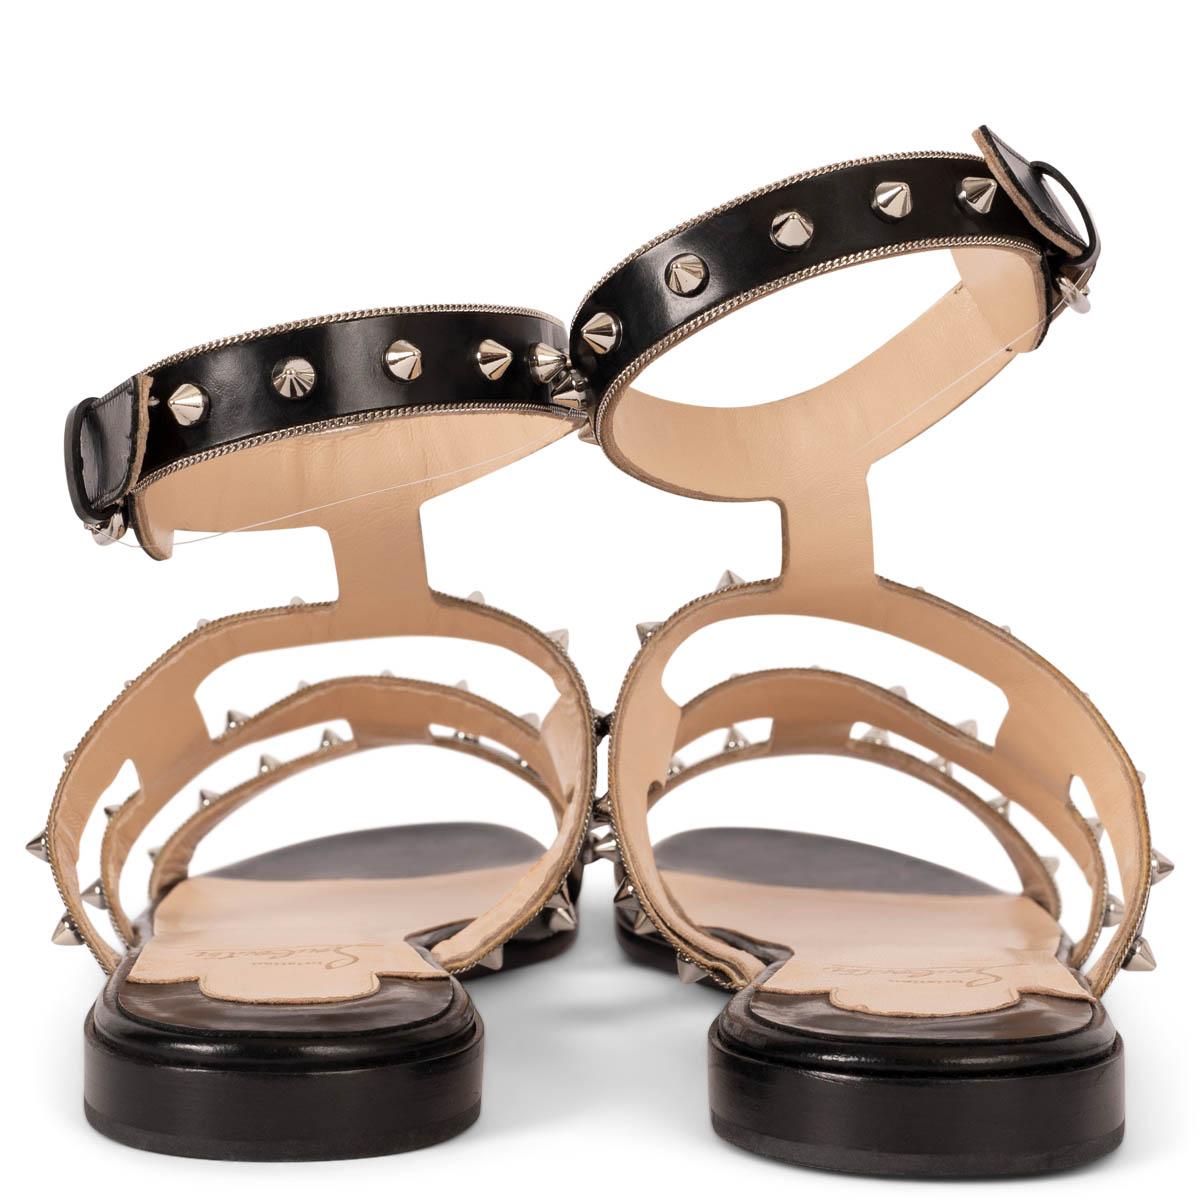 CHRISTIAN LOUBOUTIN black leather SEXISTRAPI Gladiator Sandals Shoes 39 fit 38.5 For Sale 1